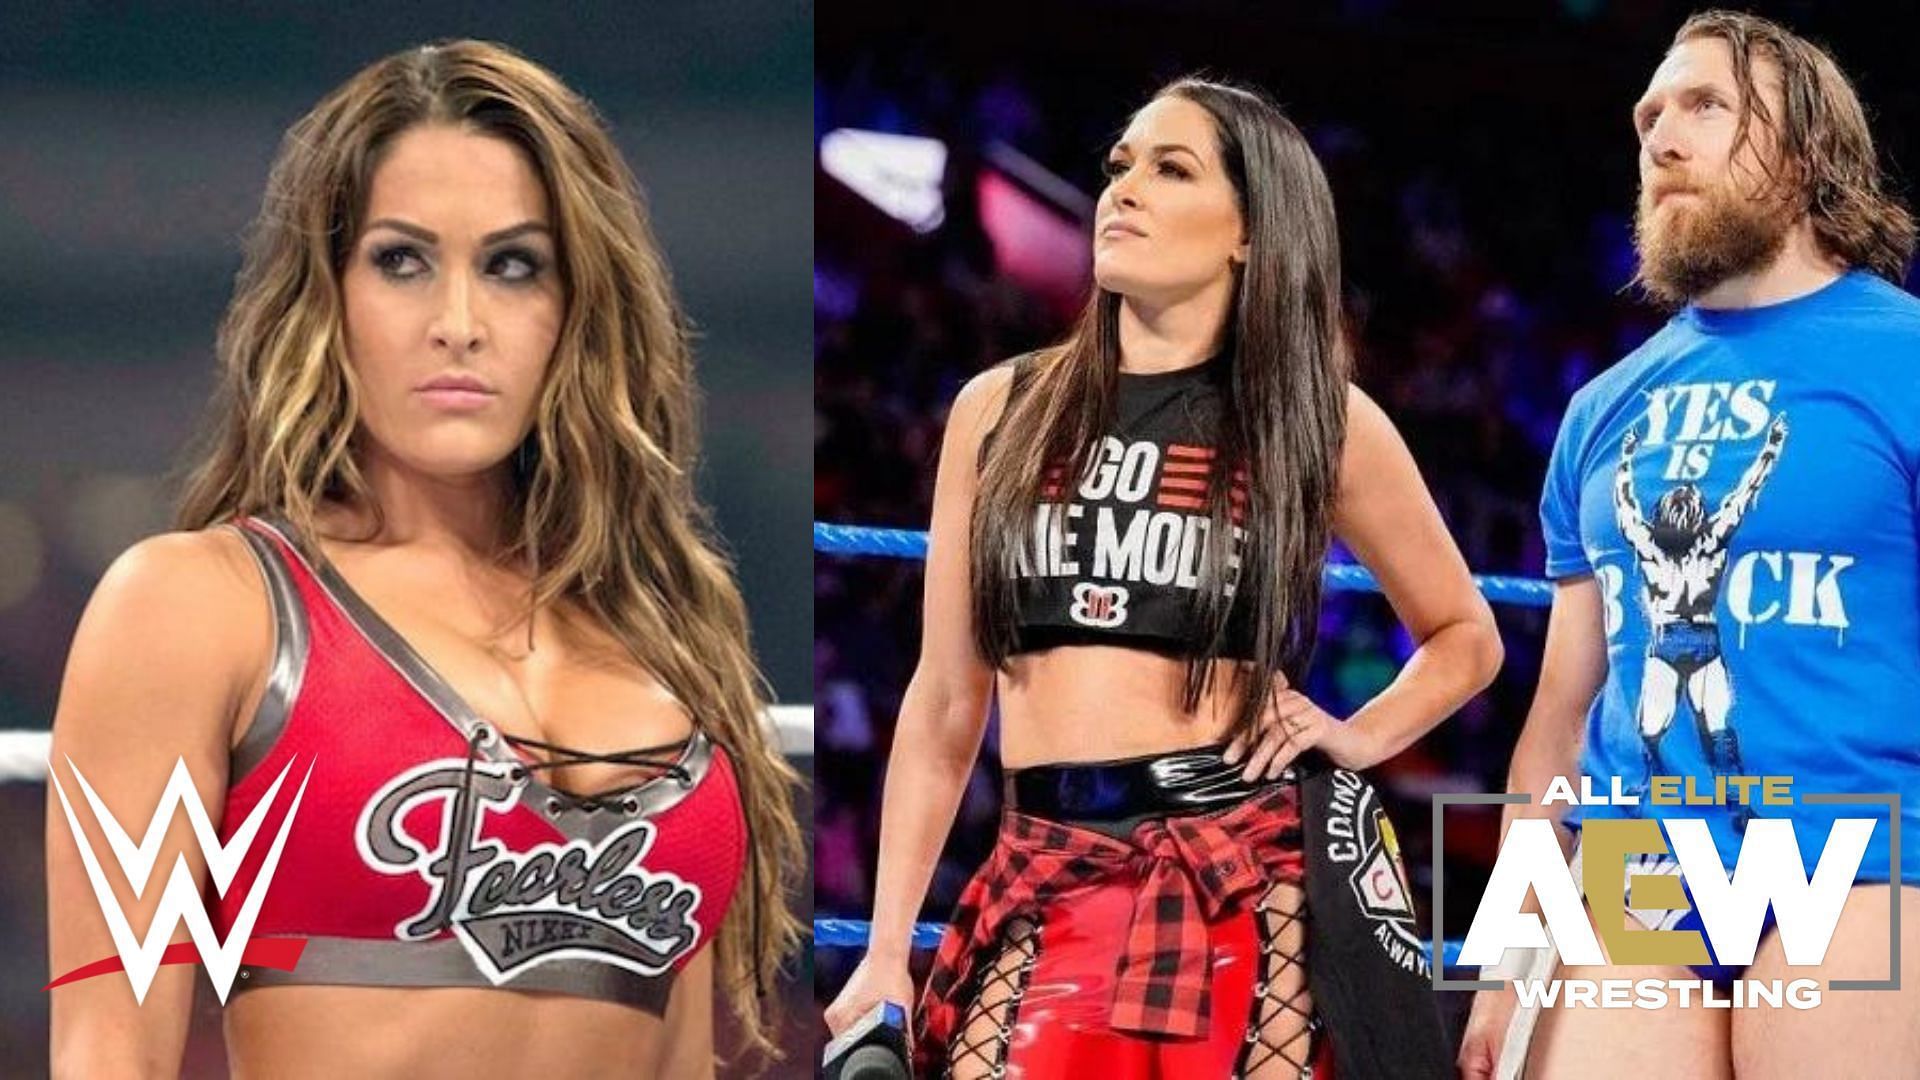 The Bella Twins recently announced that they have parted ways with WWE